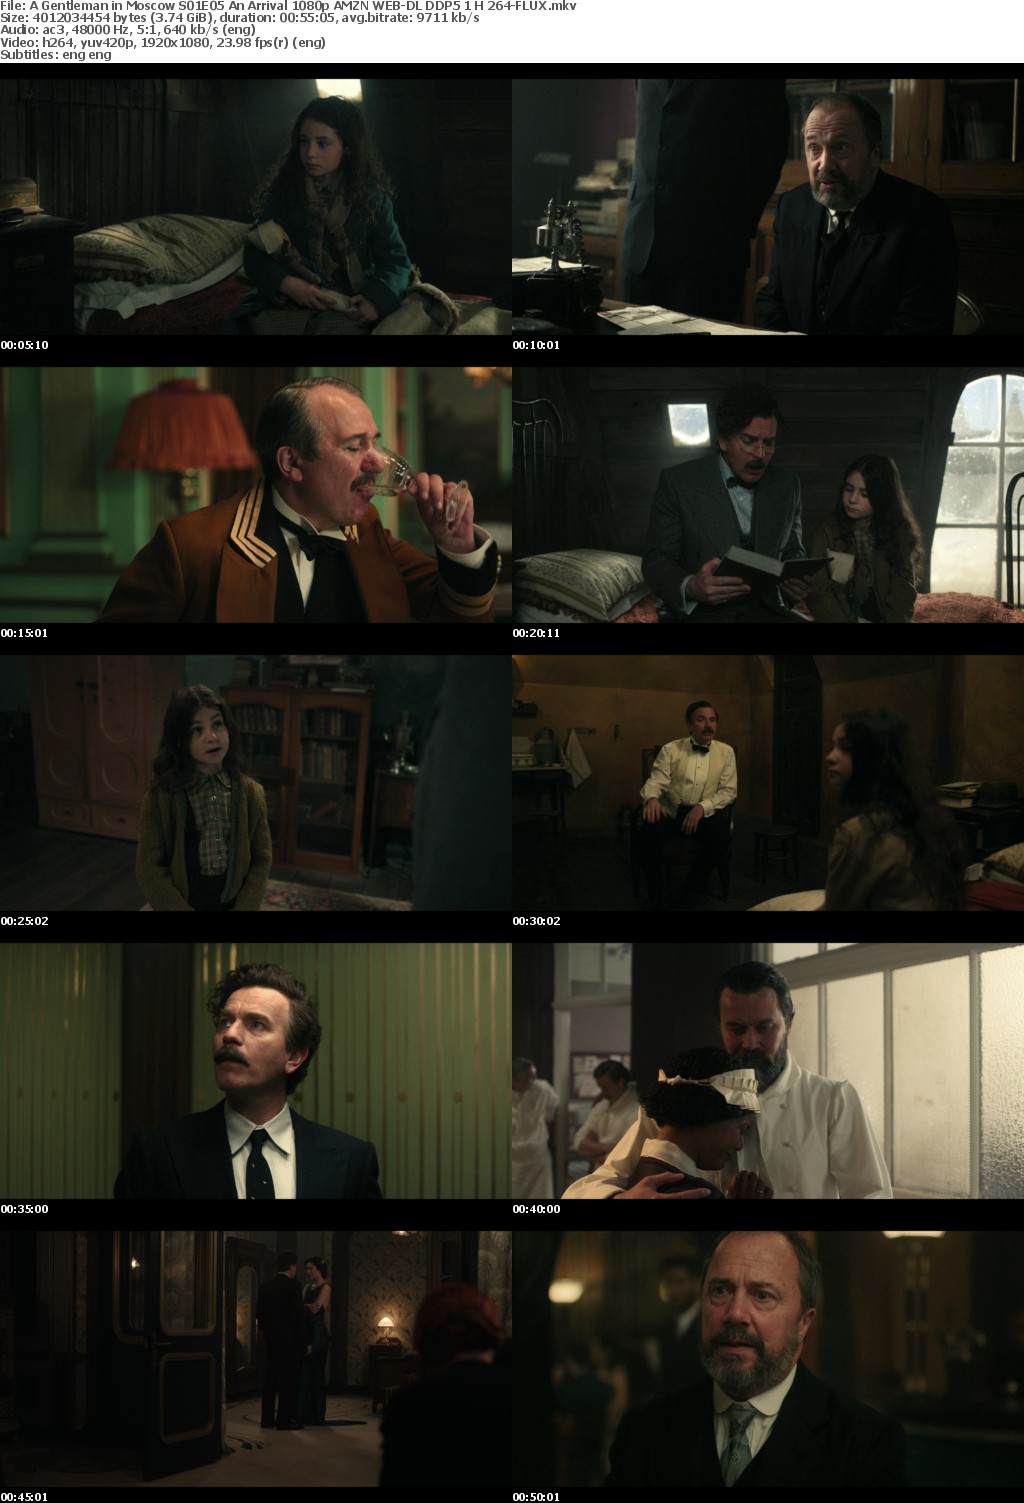 A Gentleman in Moscow S01E05 An Arrival 1080p AMZN WEB-DL DDP5 1 H 264-FLUX